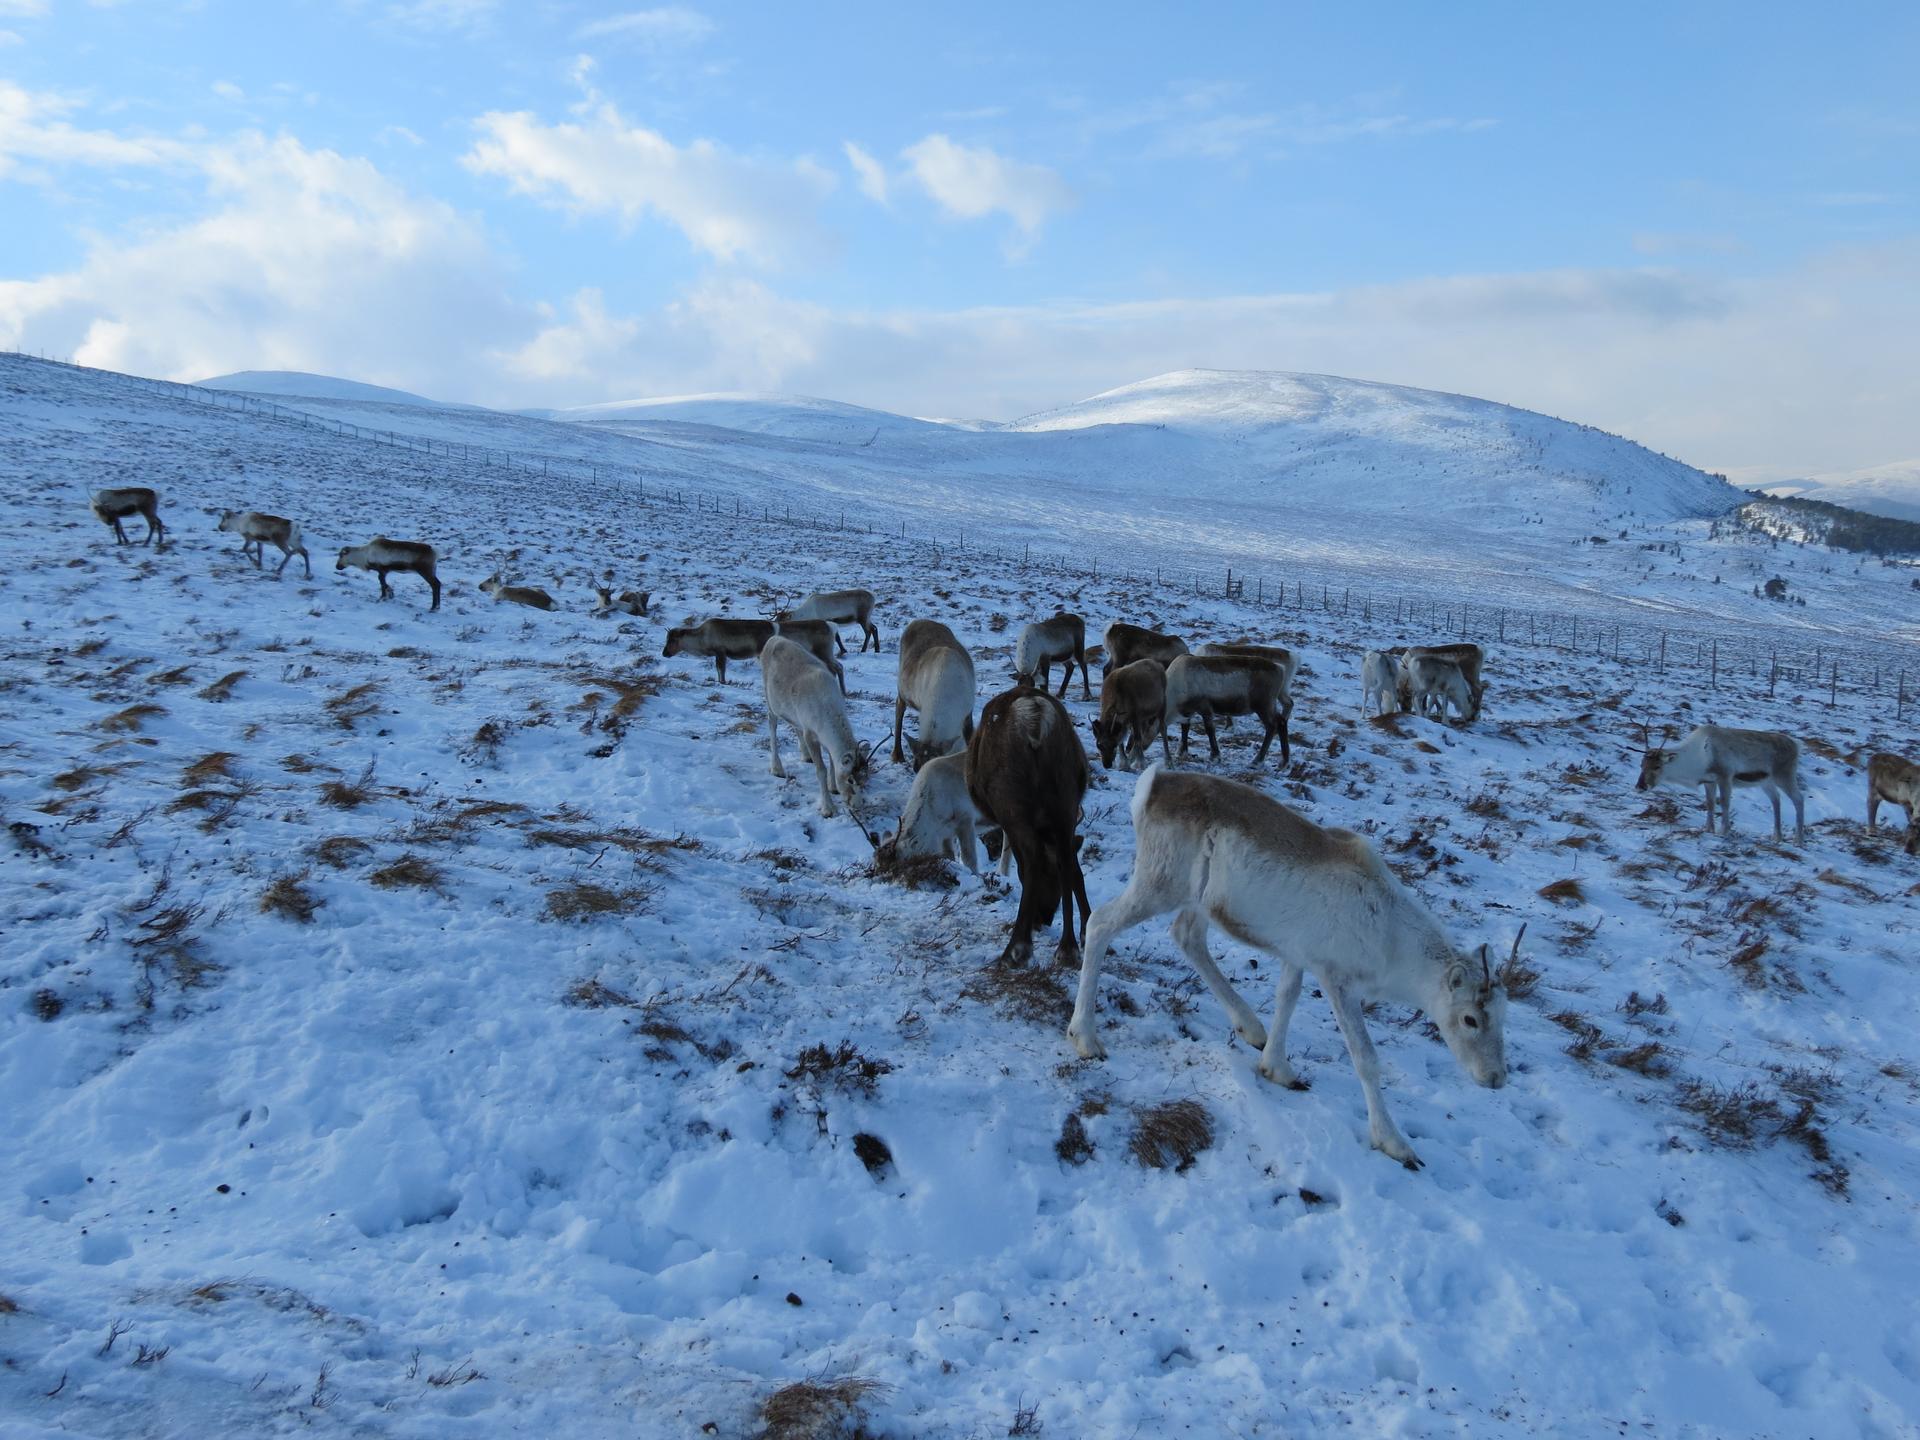 A small herd of reindeer on a snowy field